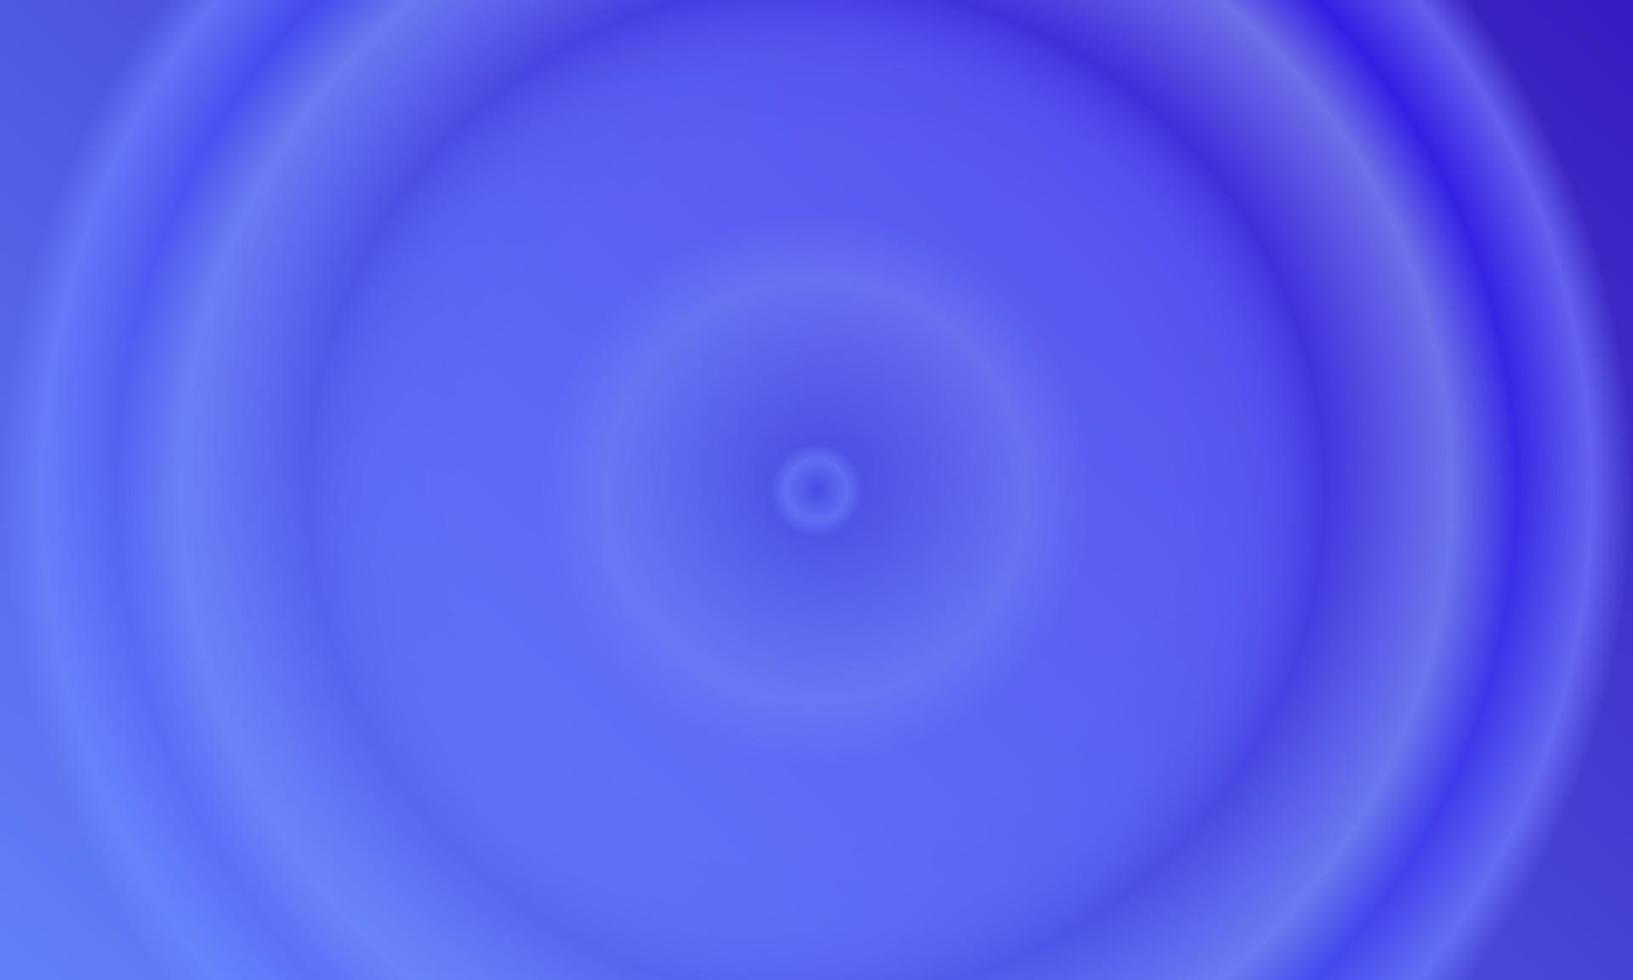 dark blue and blue circle radial gradient abstract background. simple, blur, shiny, modern and colorful style. use for homepage, backgdrop, wallpaper, cover, poster, banner or flyer vector